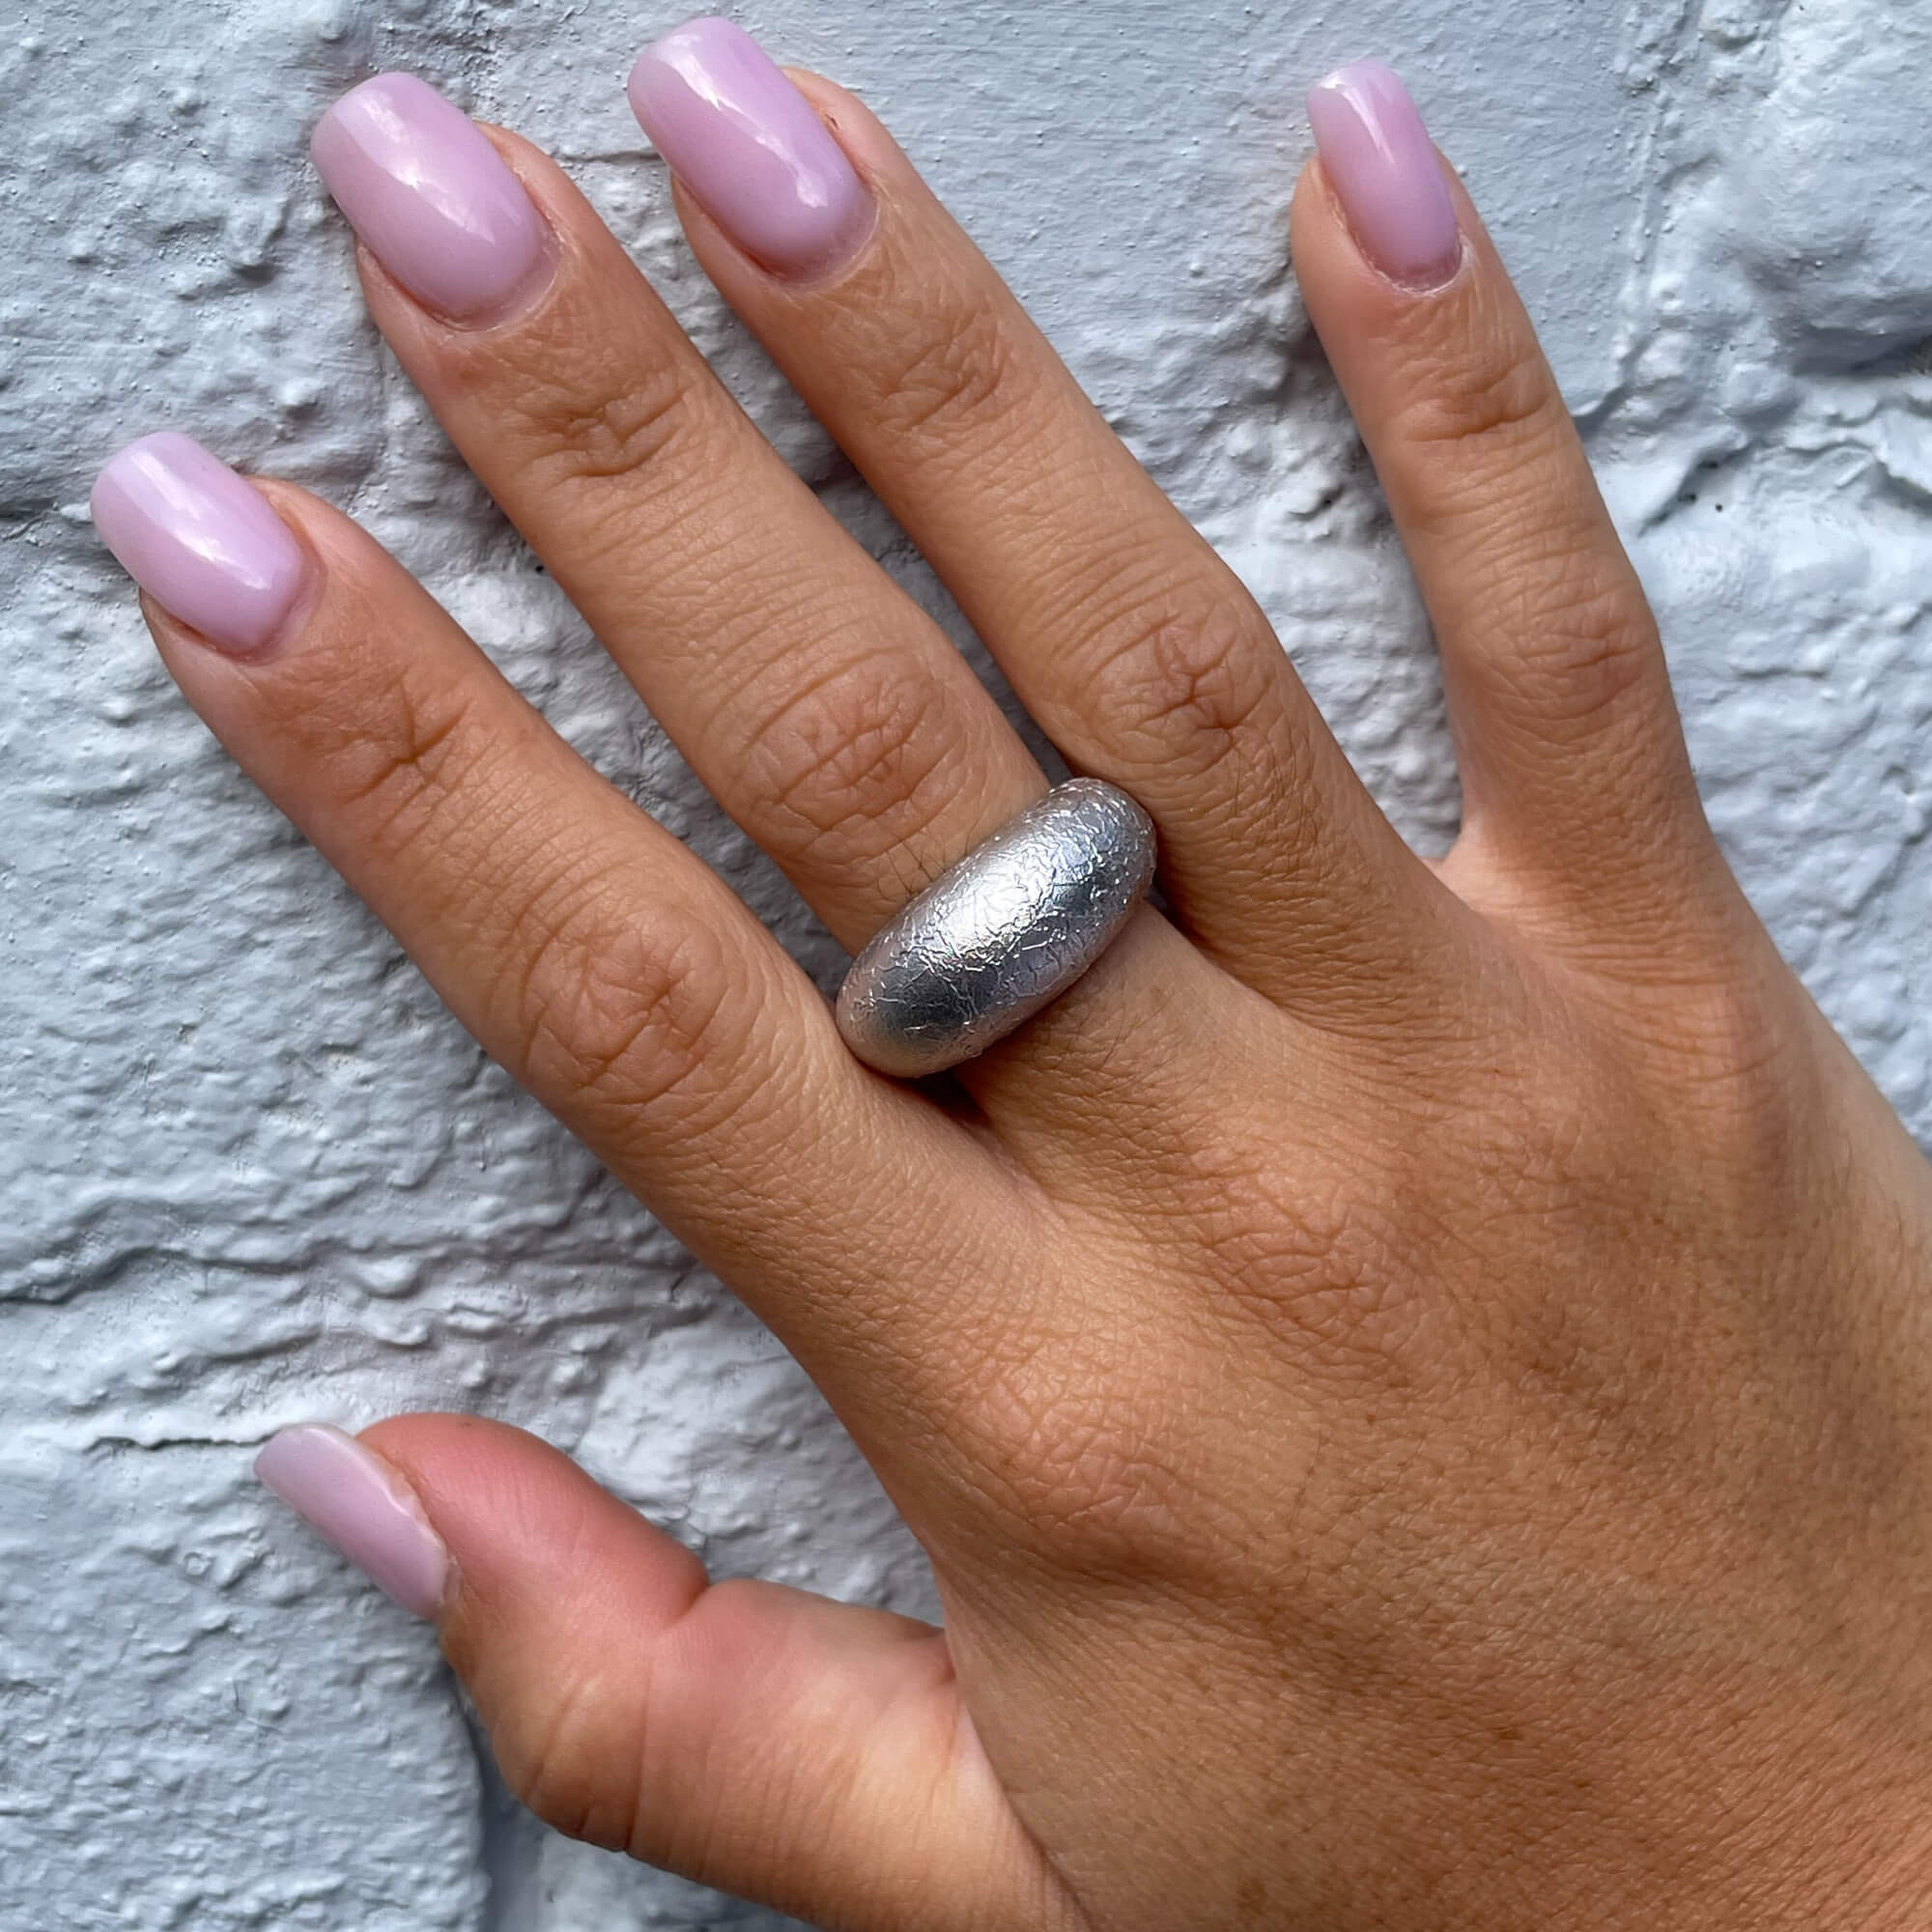 Worked silver and matte ring